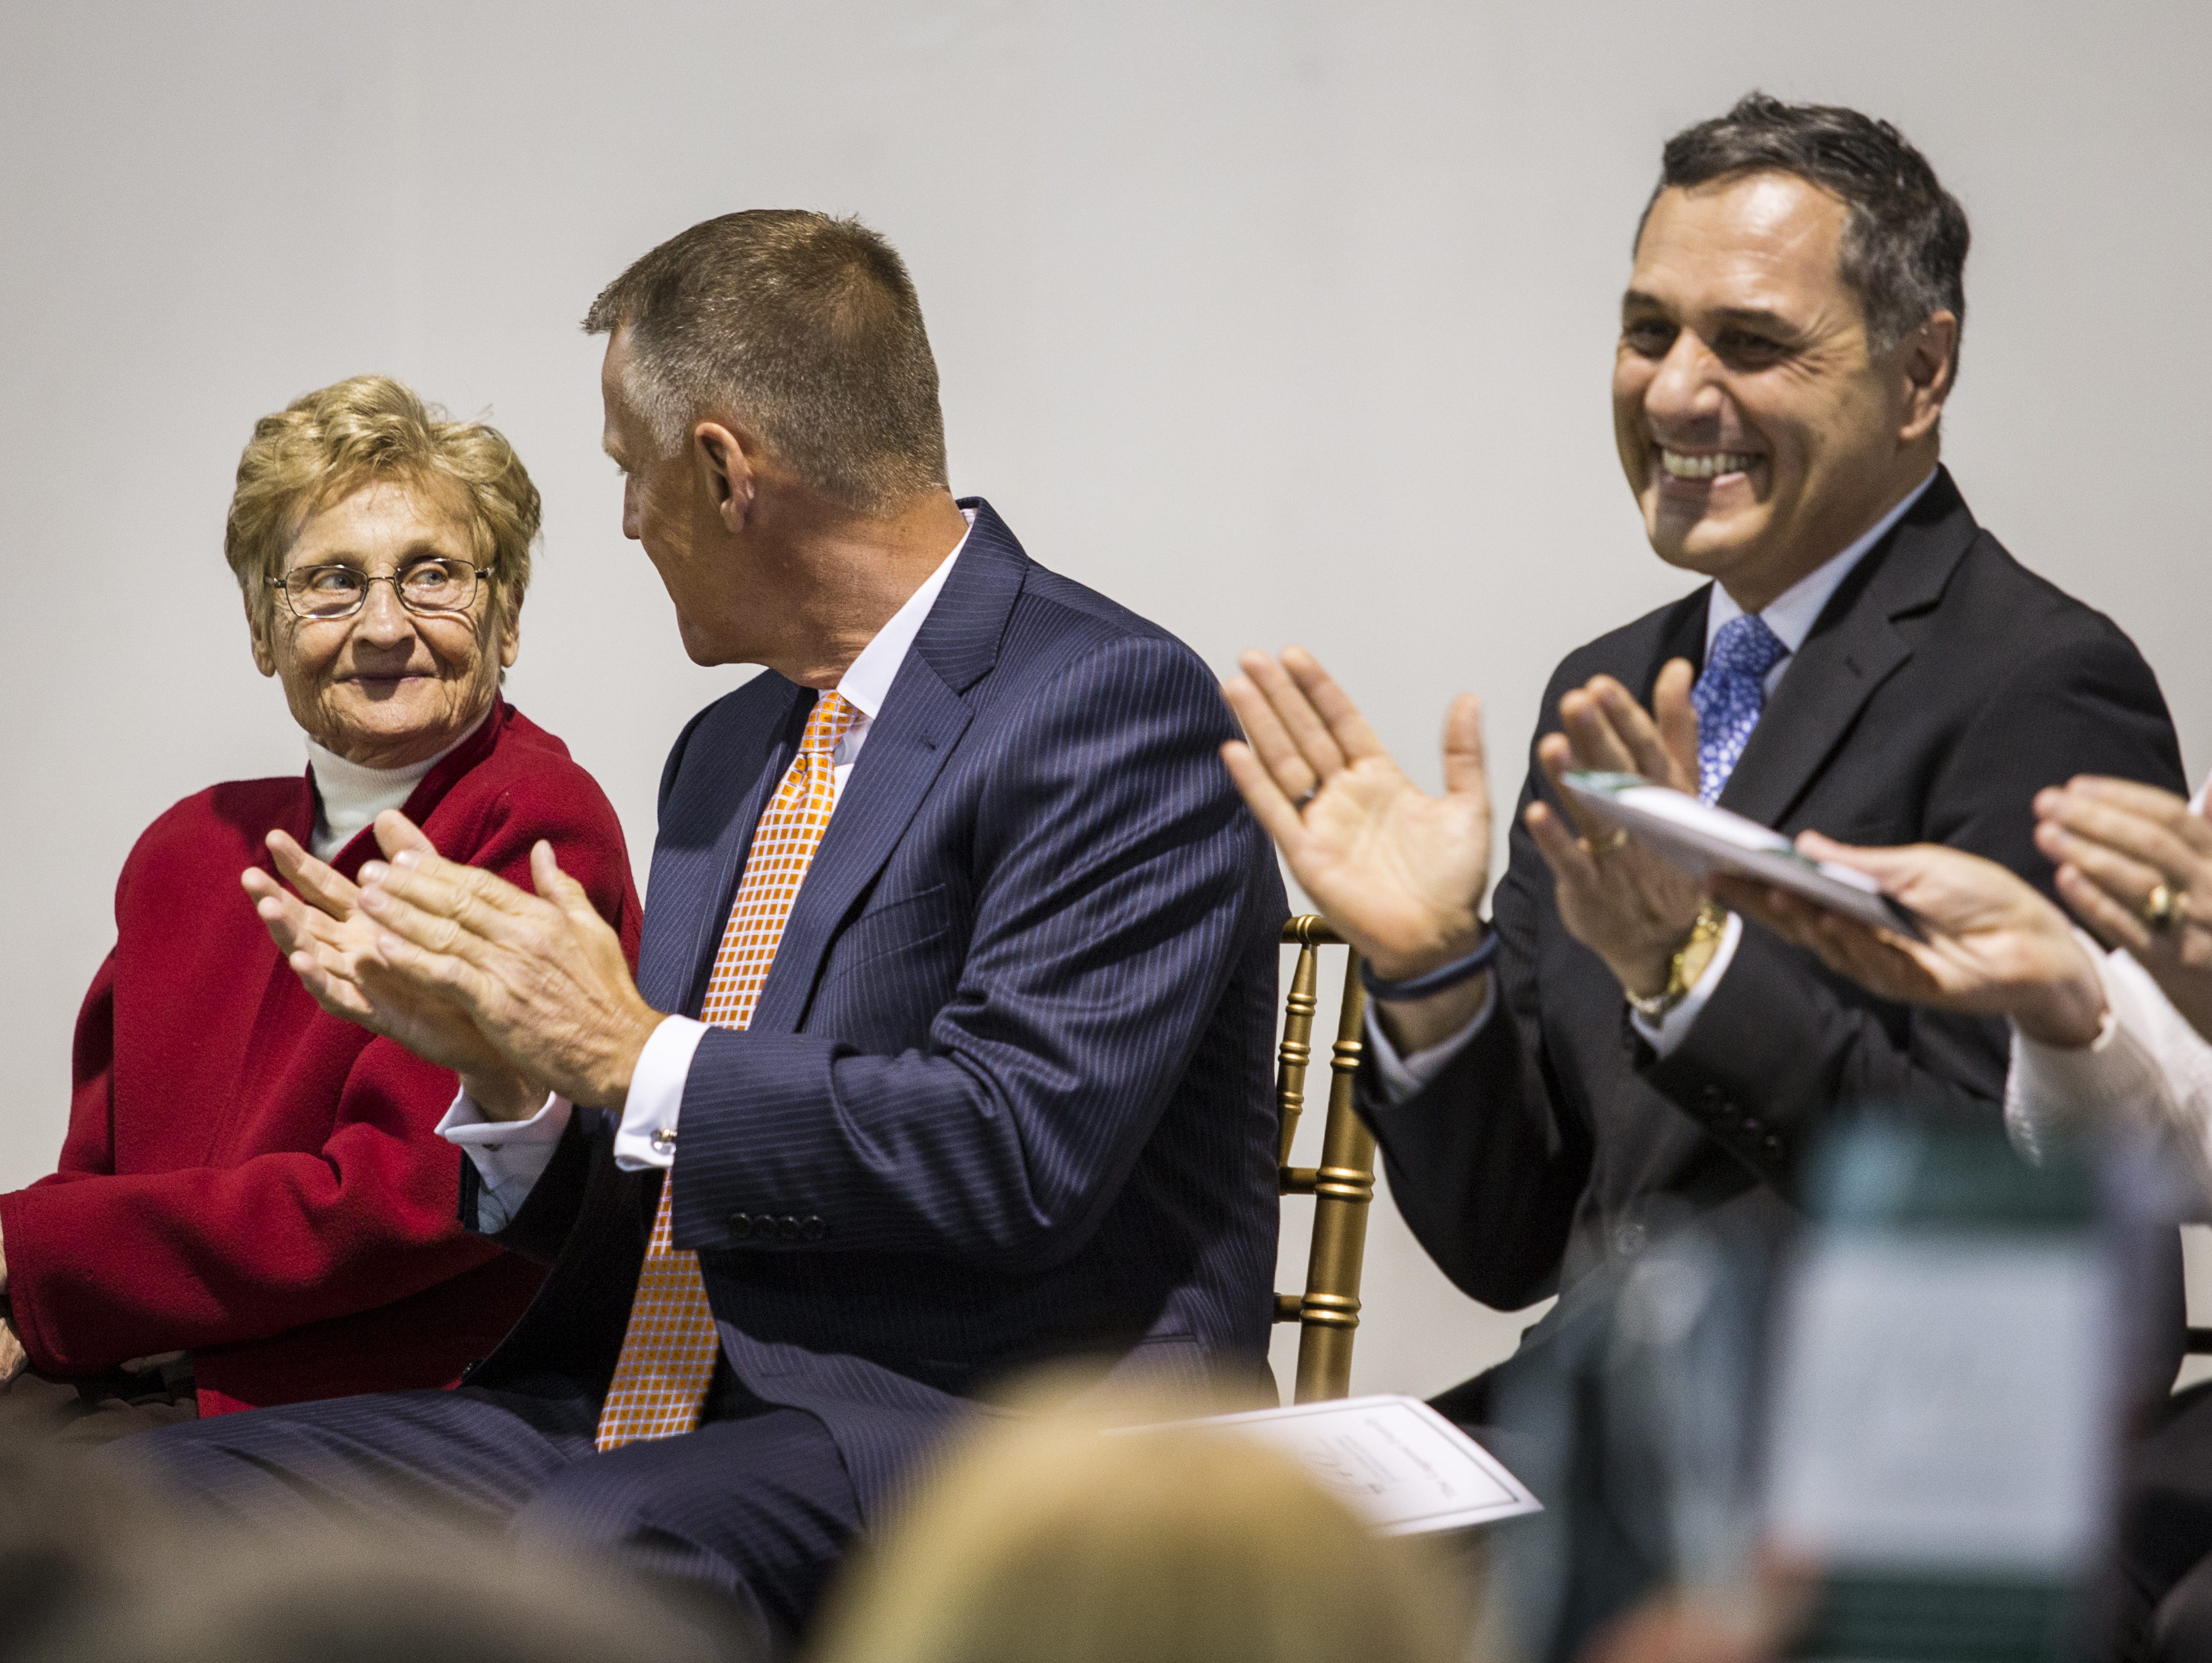 Marcy Aitken looks to her son Mark as she's applauded at a ceremony honoring Aitken for her contributions to Archmere on Thursday evening.